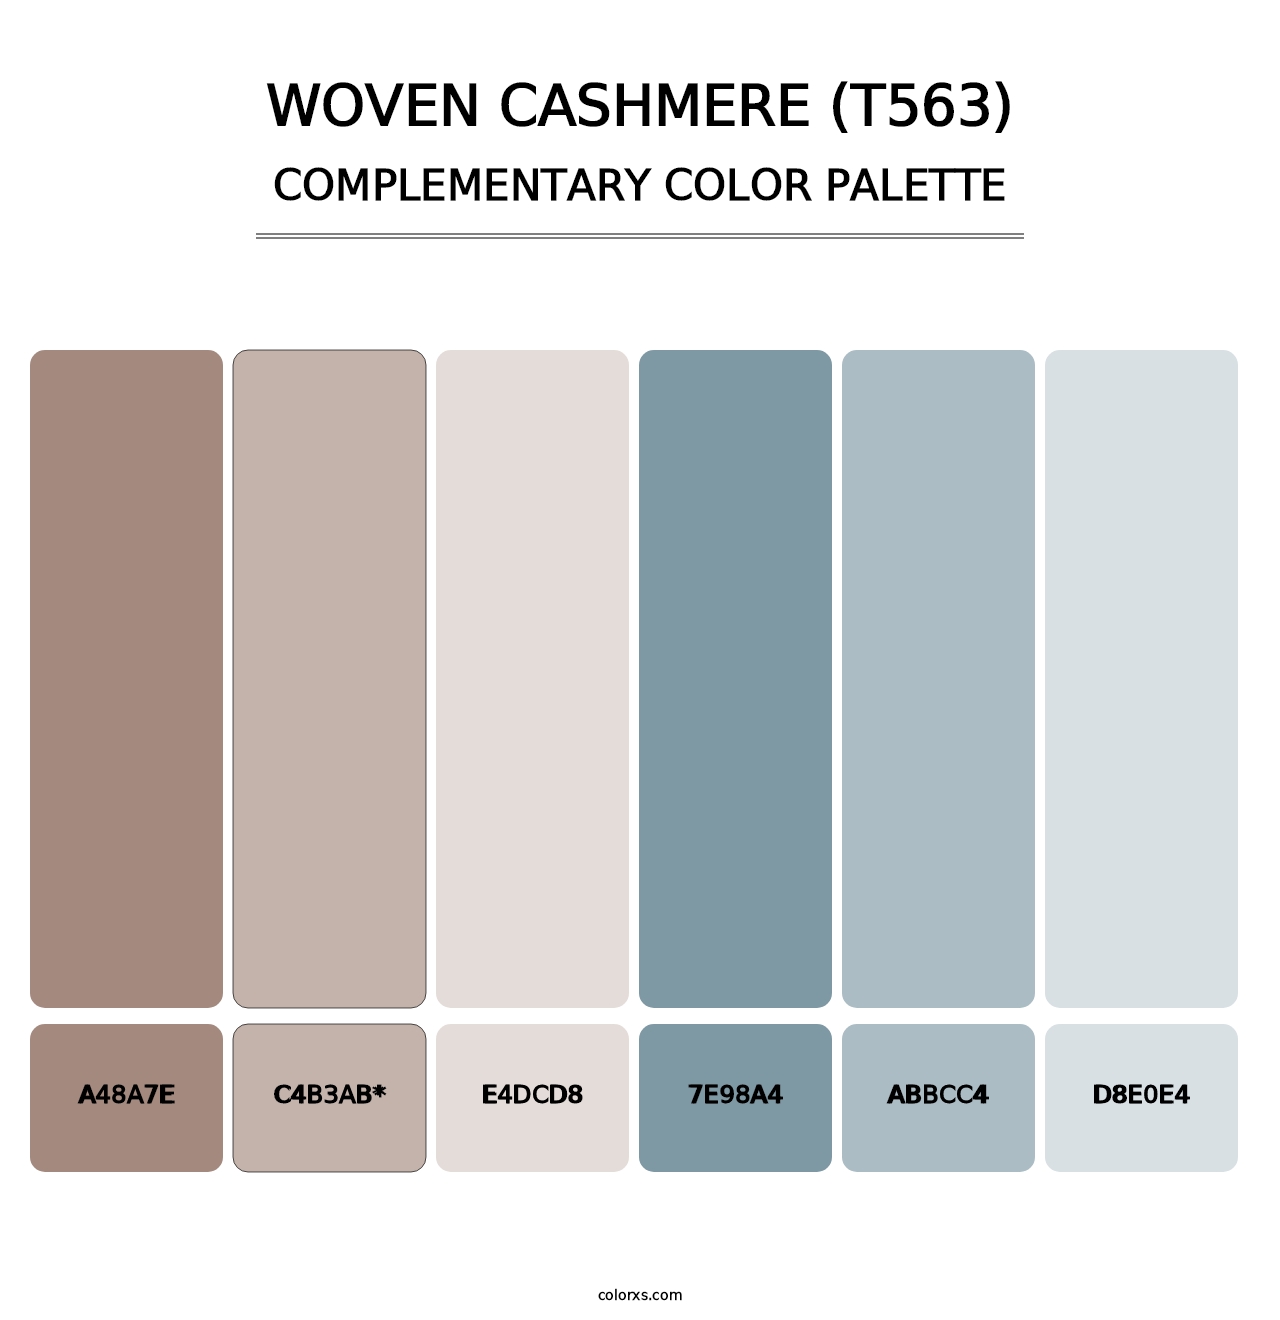 Woven Cashmere (T563) - Complementary Color Palette